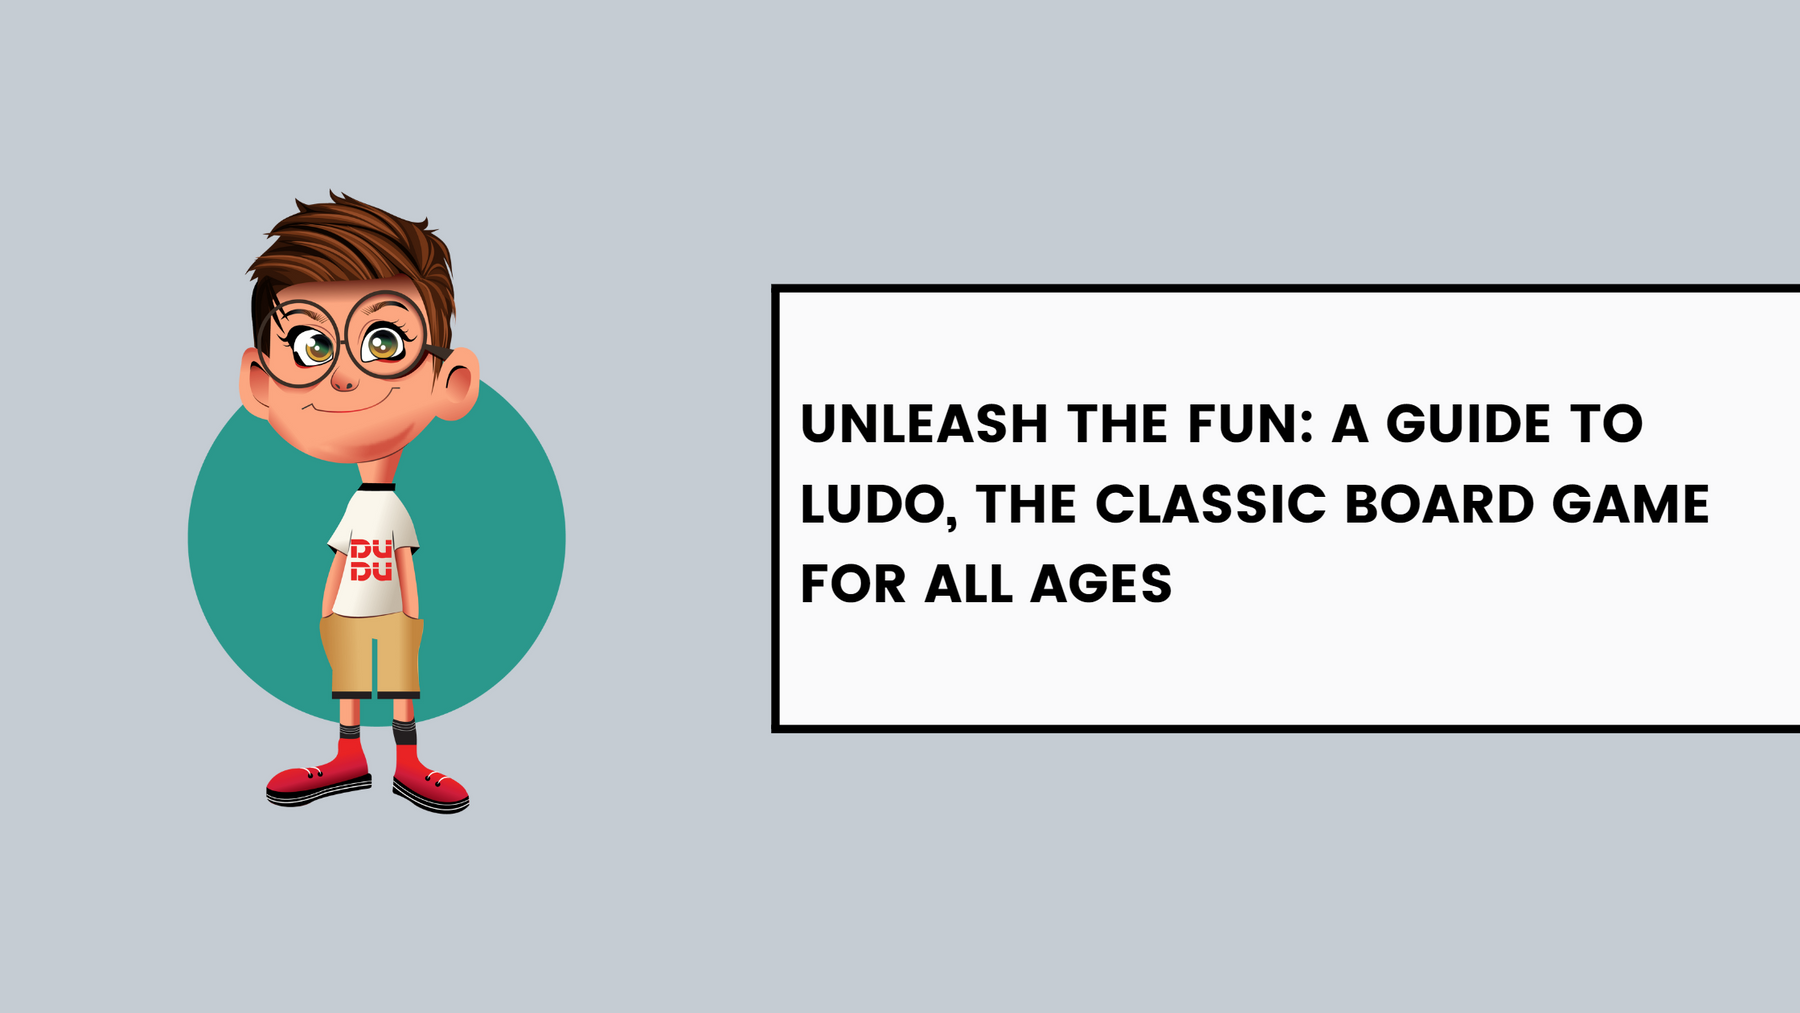 Unleash the Fun: A Guide to Ludo, the Classic Board Game for All Ages